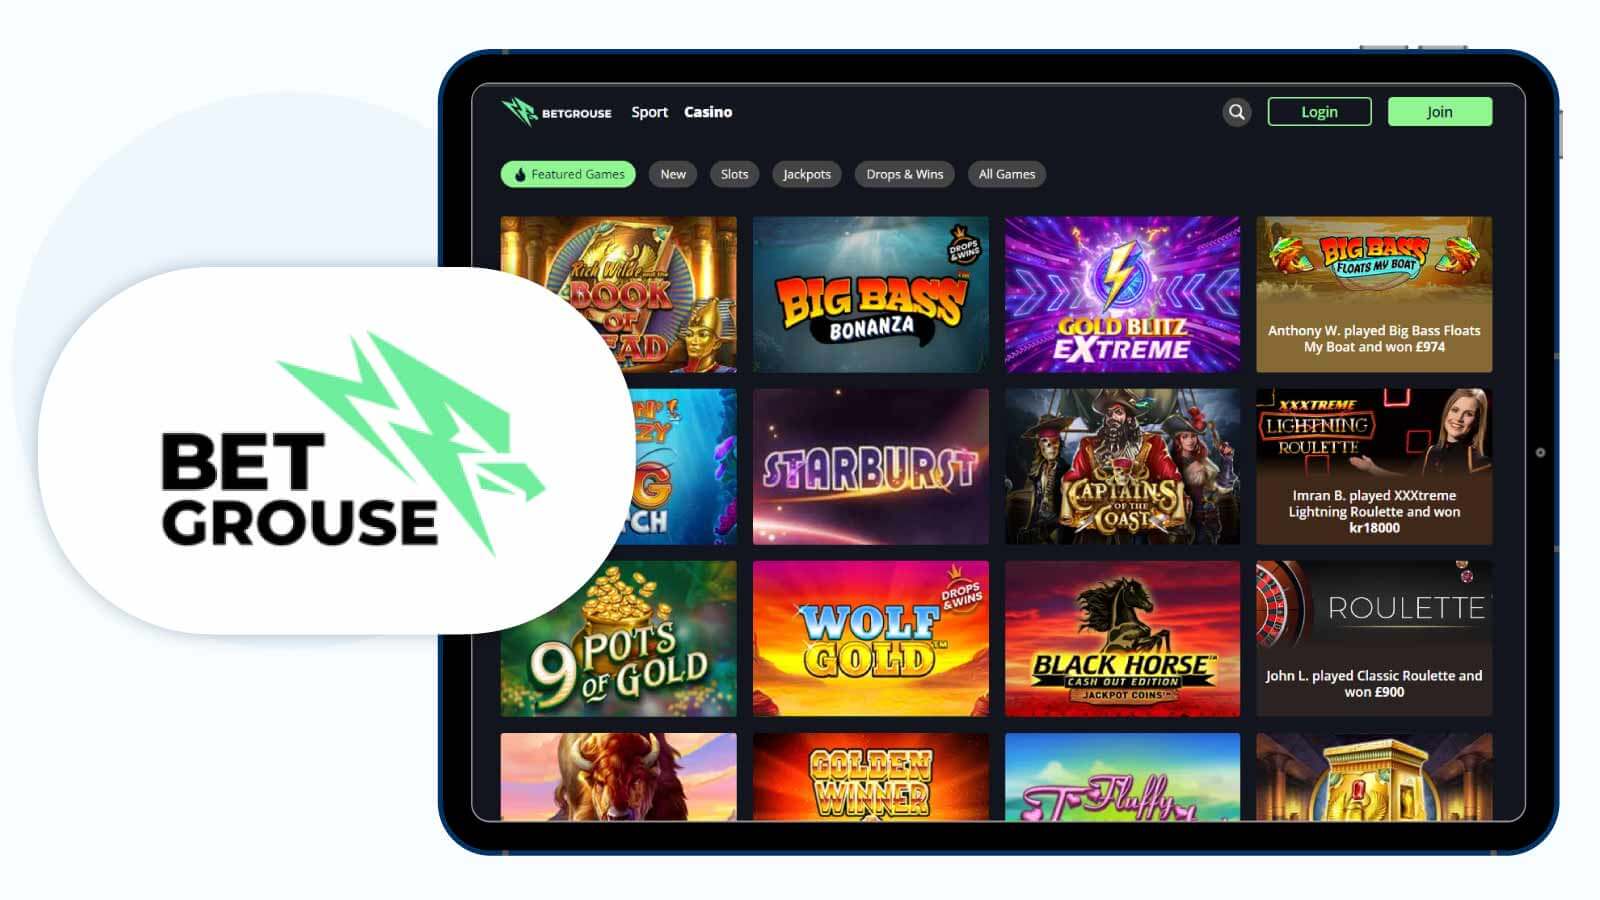 Betgrouse Casino Best AstroPay Casino for Jackpot Games